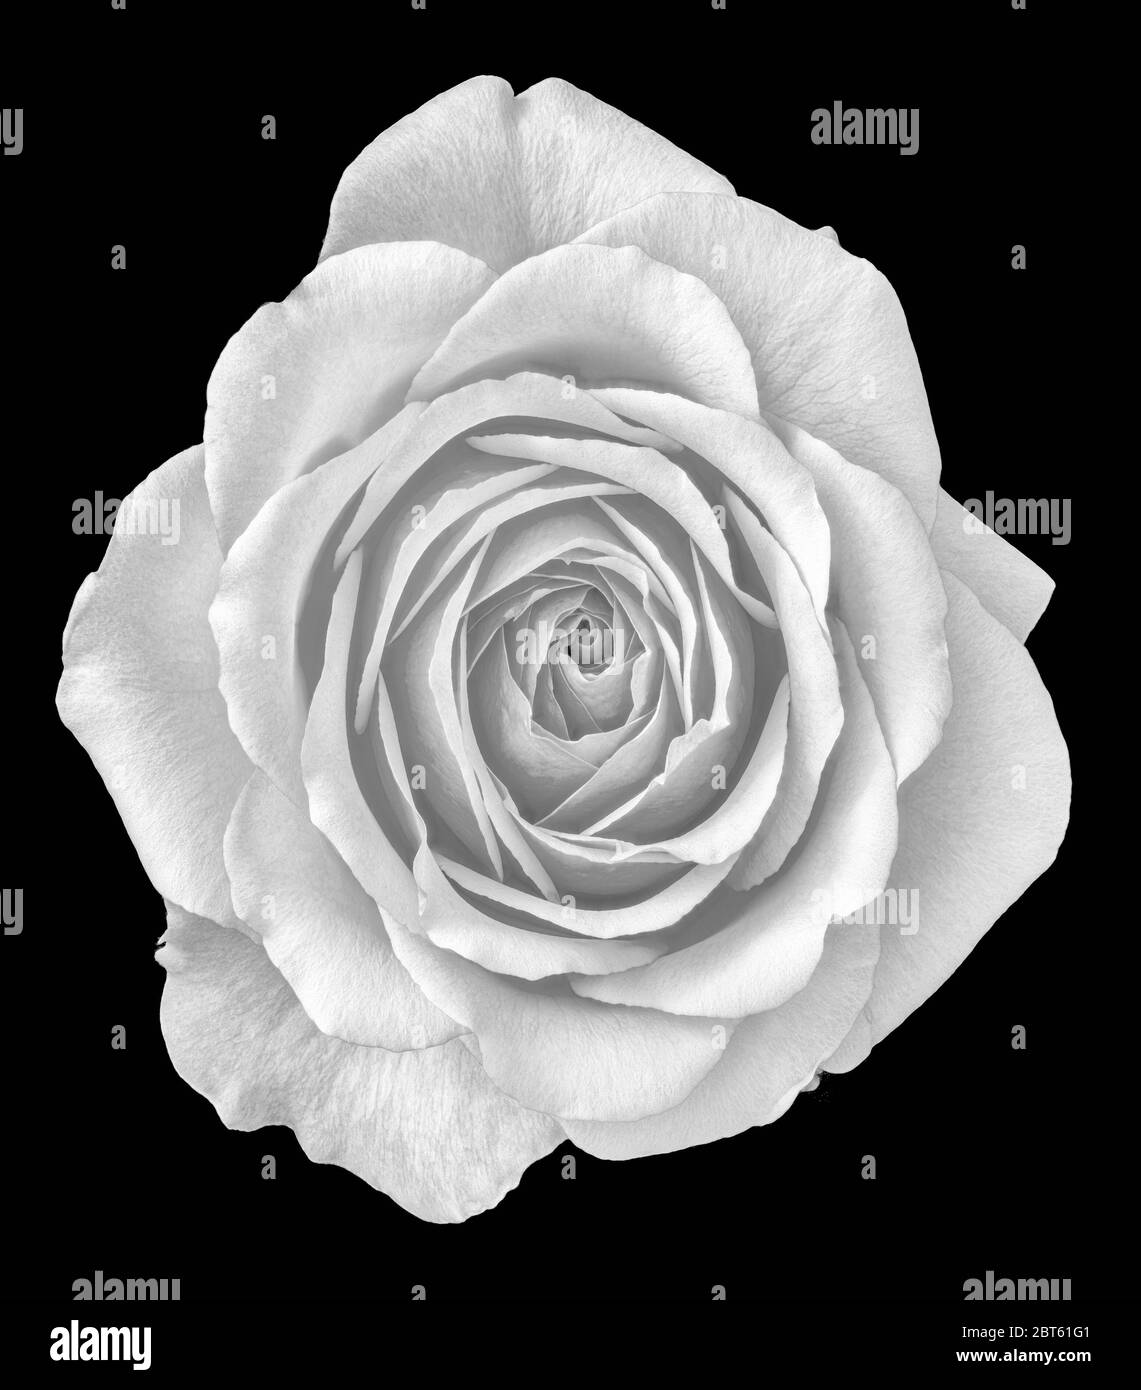 Monochrome white rose blossom macro on black background,fine art still life close-up of a single isolated bloom with detailed texture Stock Photo